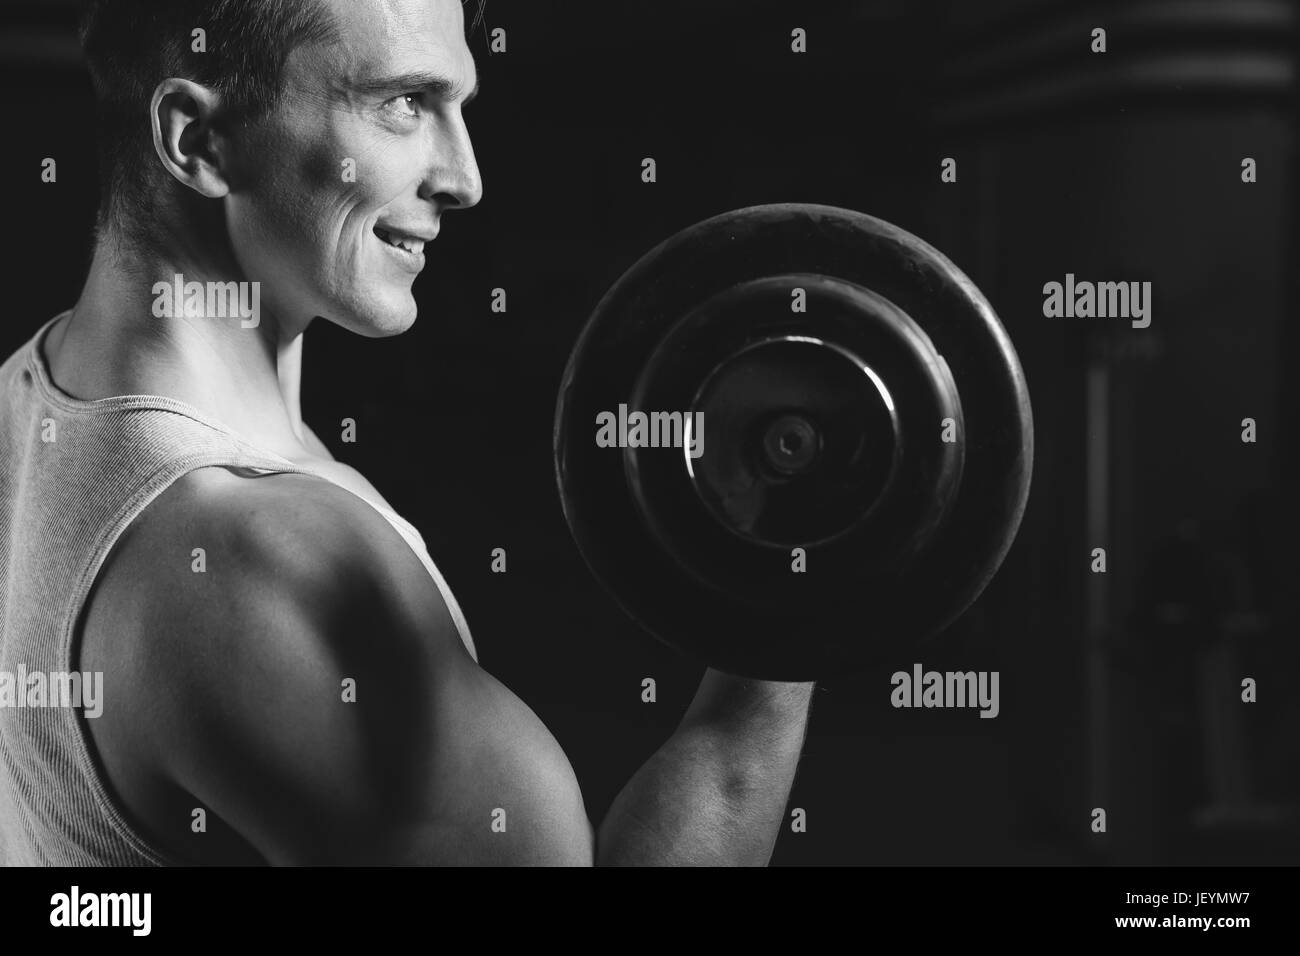 Closeup portrait of a muscular man workout with barbell at gym.  Deadlift barbells workout. Stock Photo